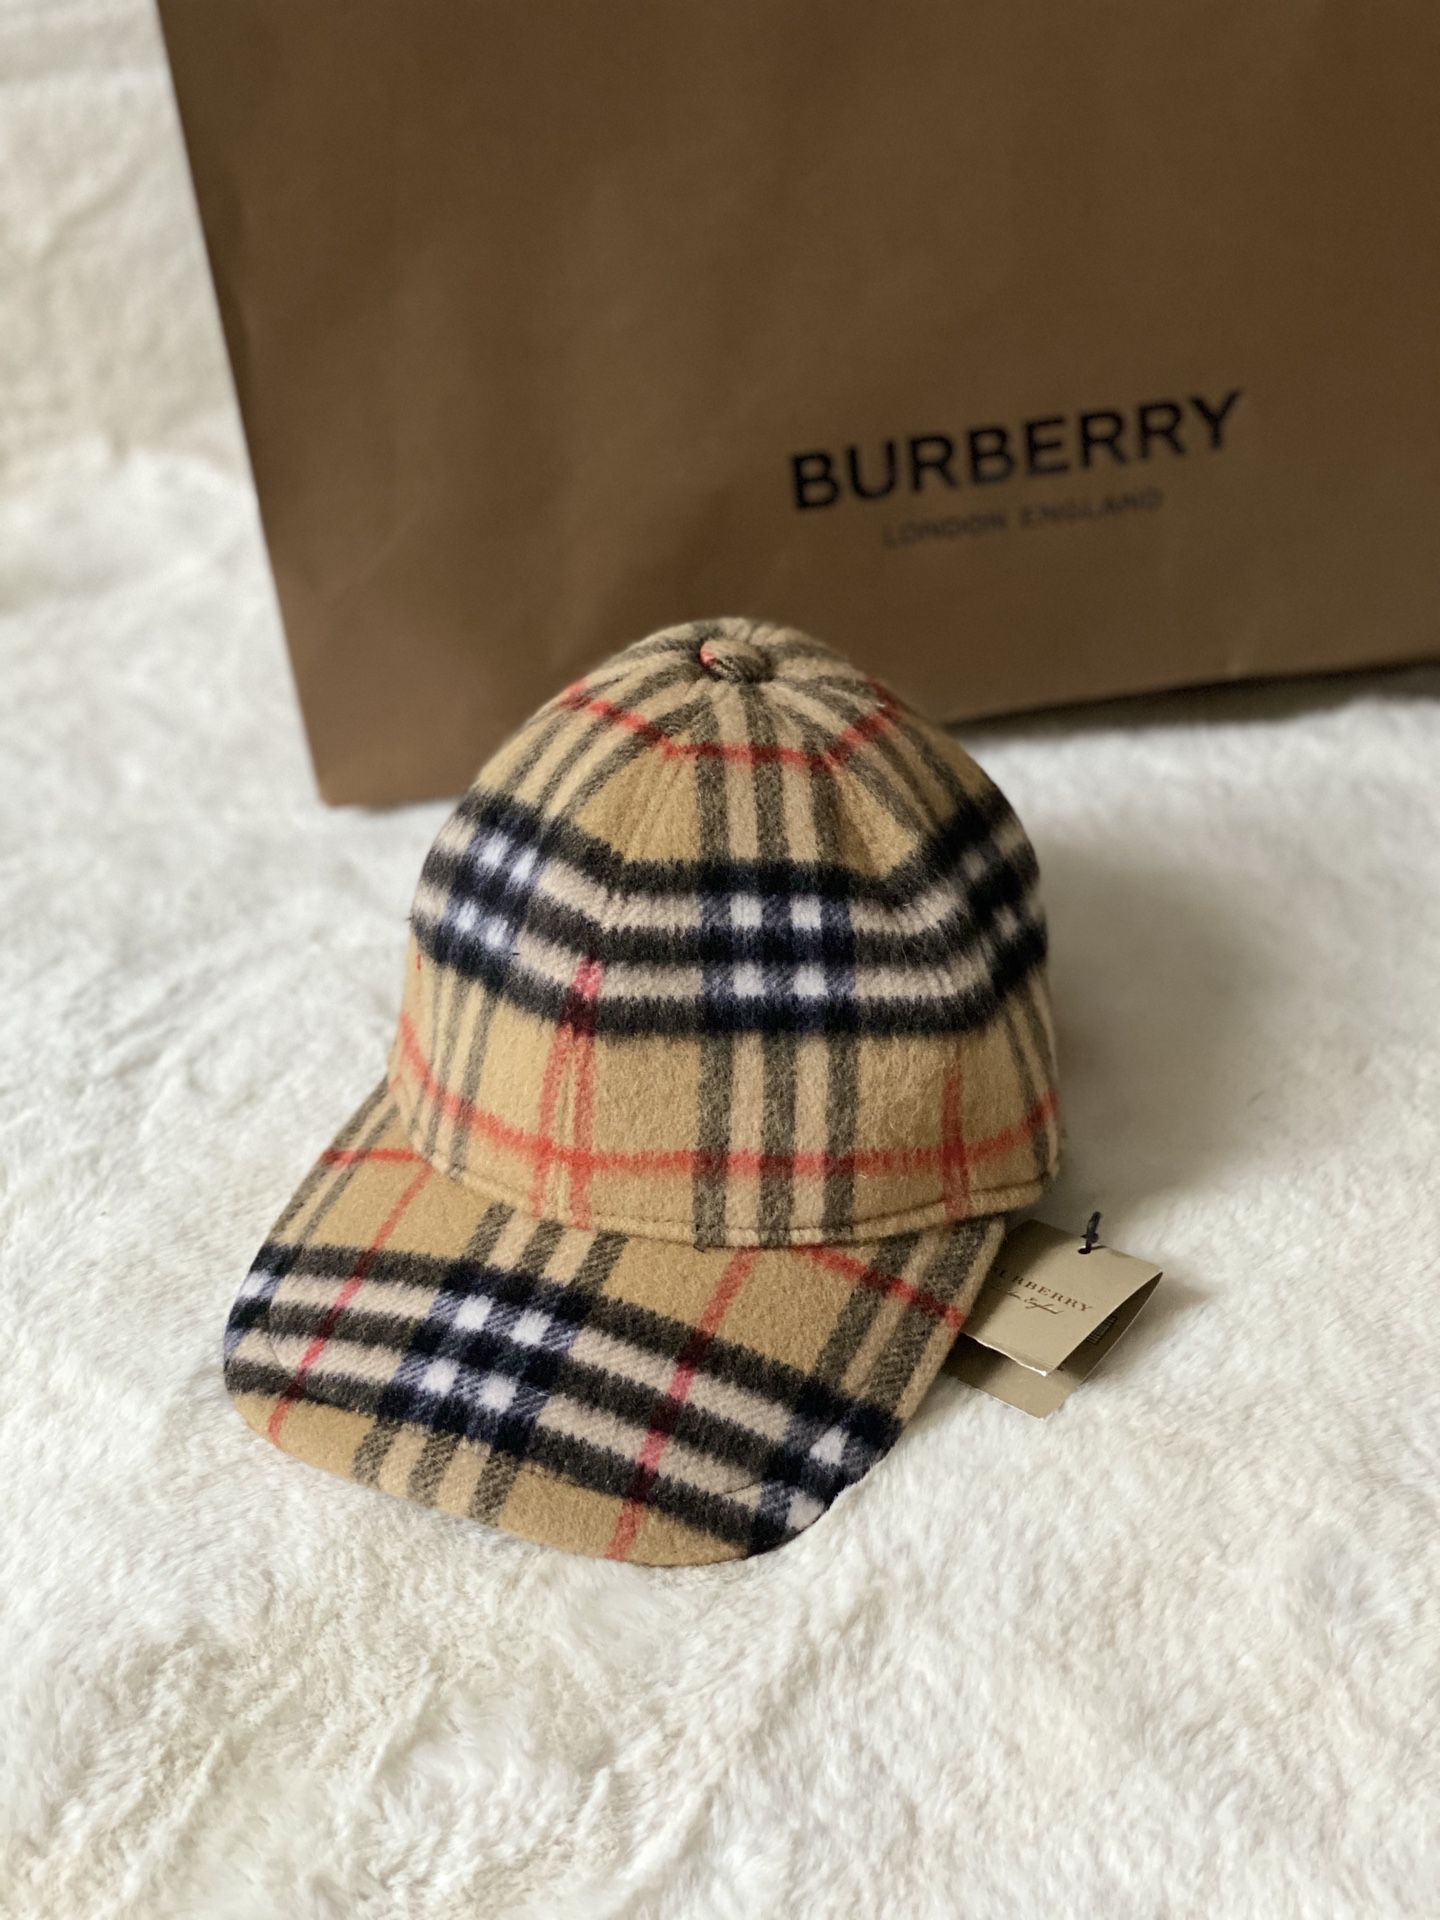 Burberry Vintage Checkered Wool Baseball Cap Size Small